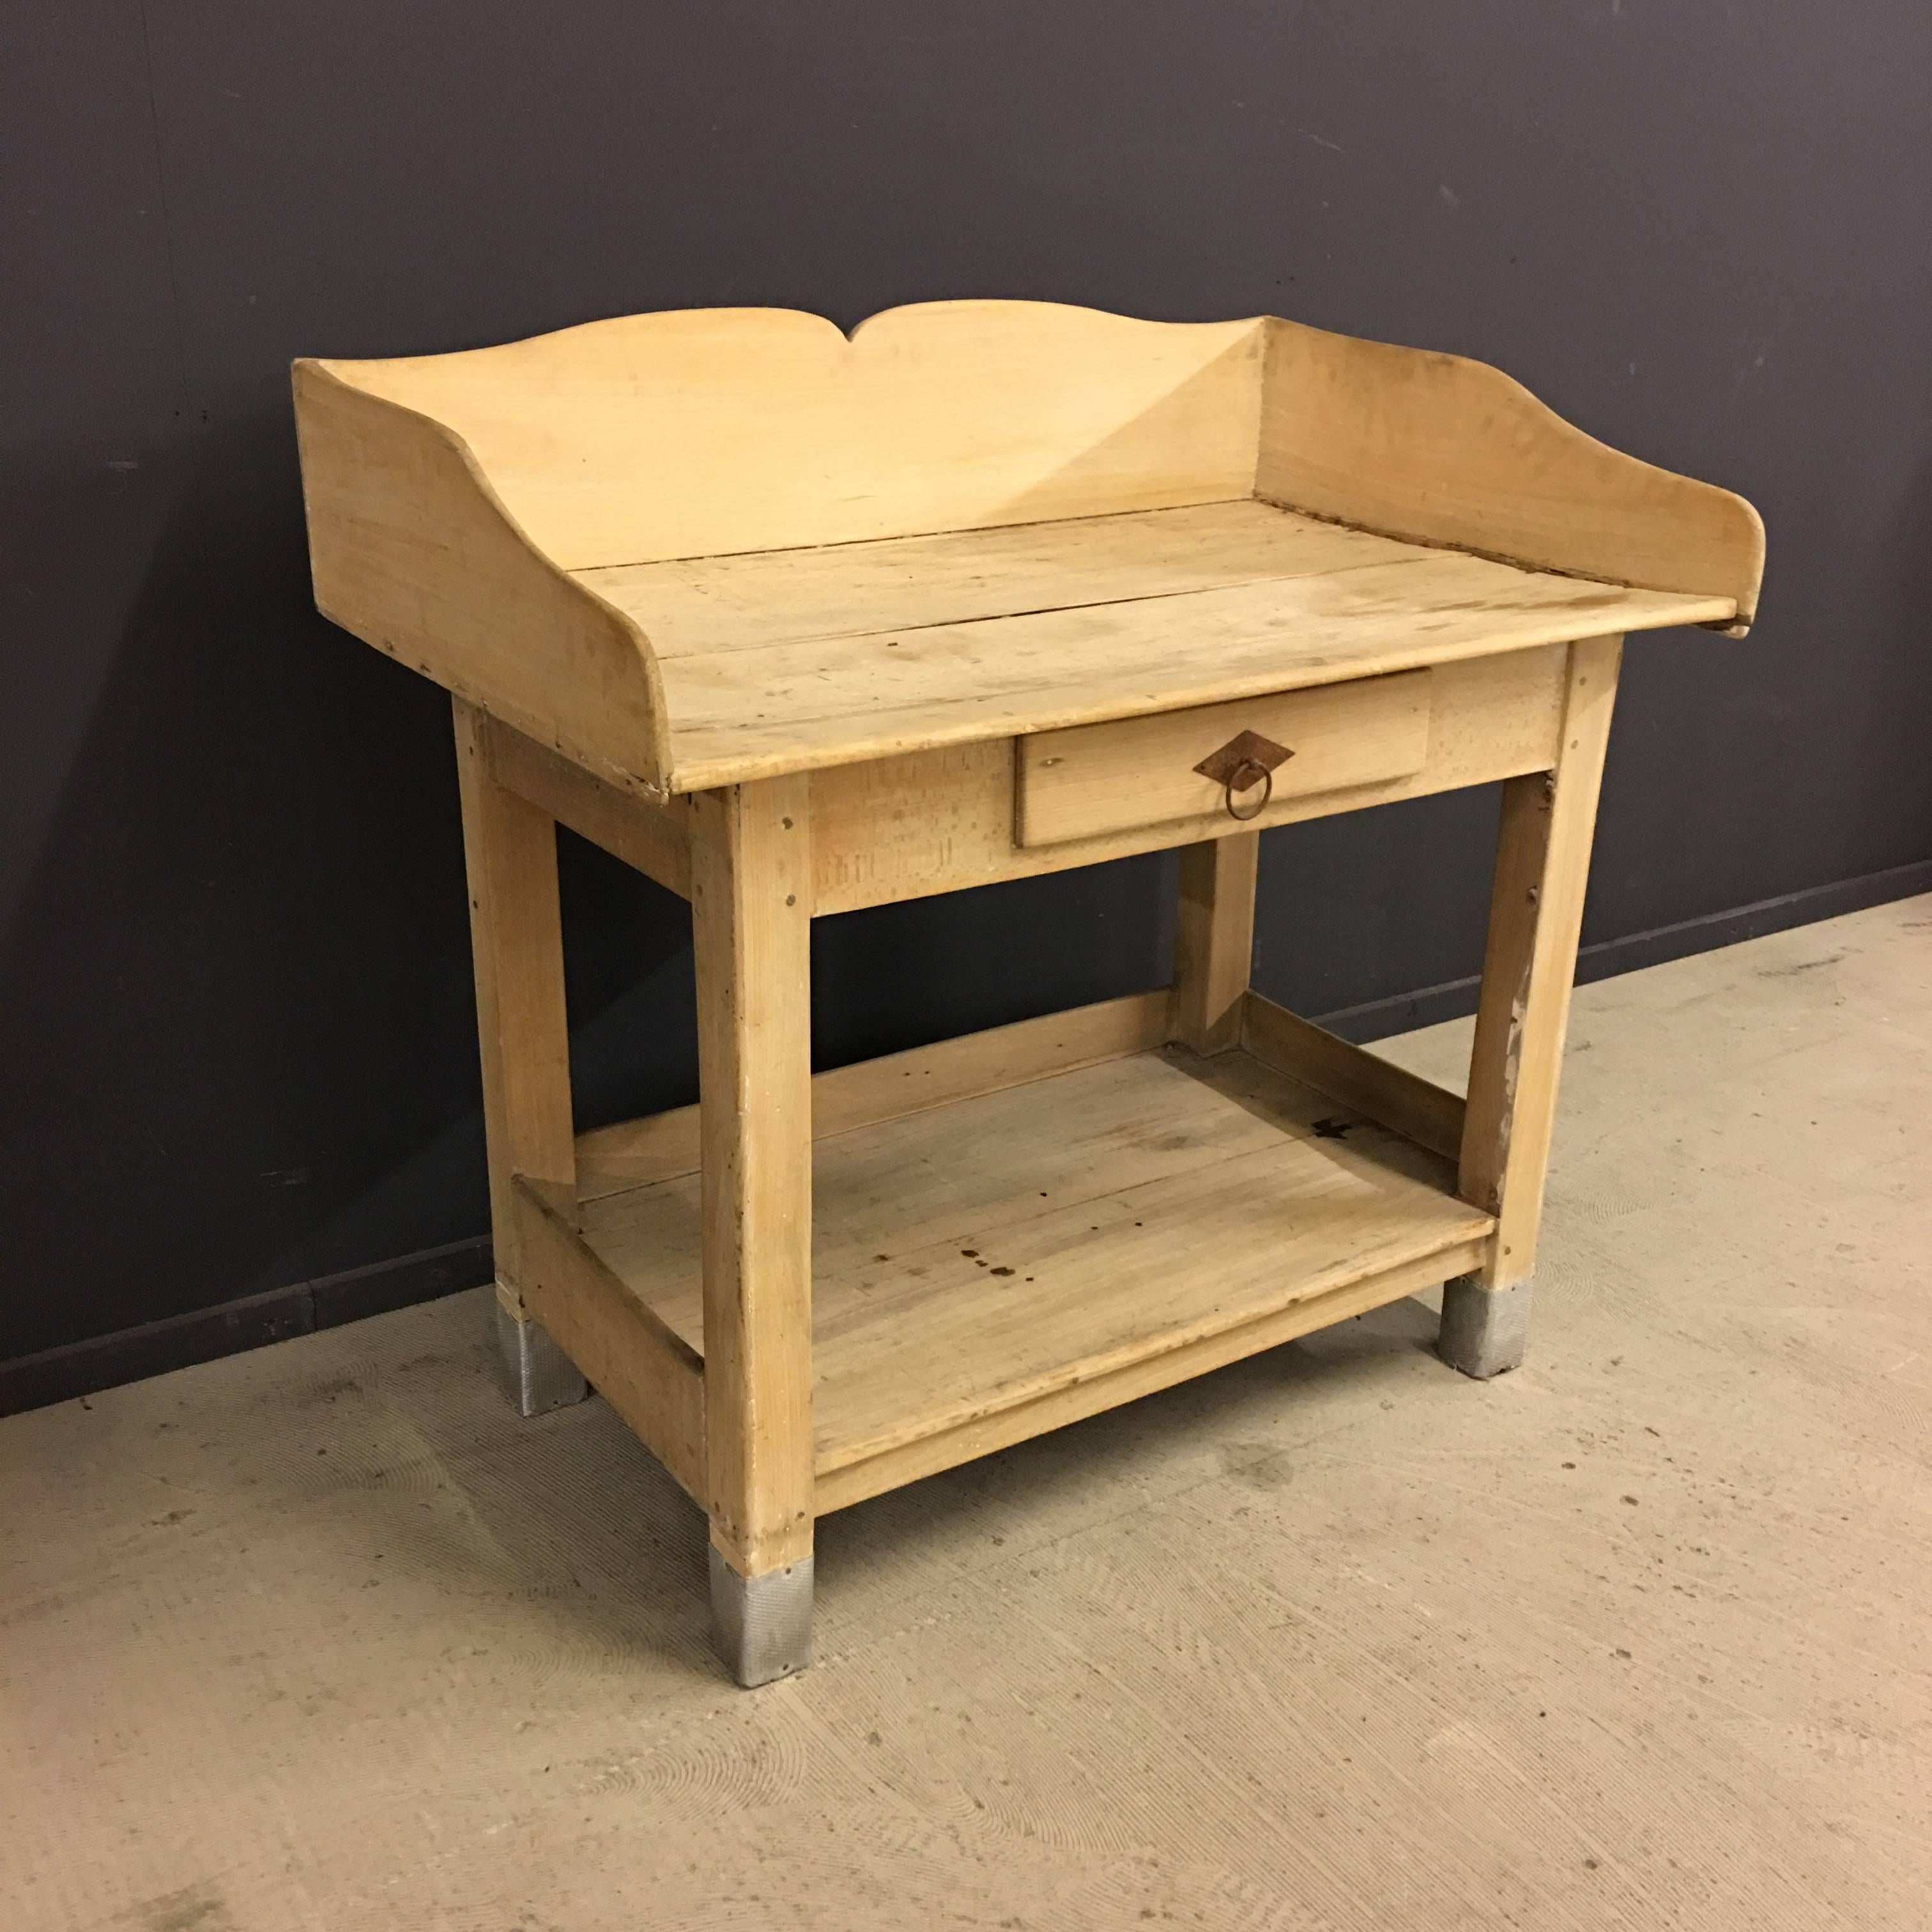 This French antique wooden baker table is manufactured during the 1920s and has been leached. The wooden top is slightly bended and has a worn look.
All four legs are covered with metal for protection.
It features one drawer.